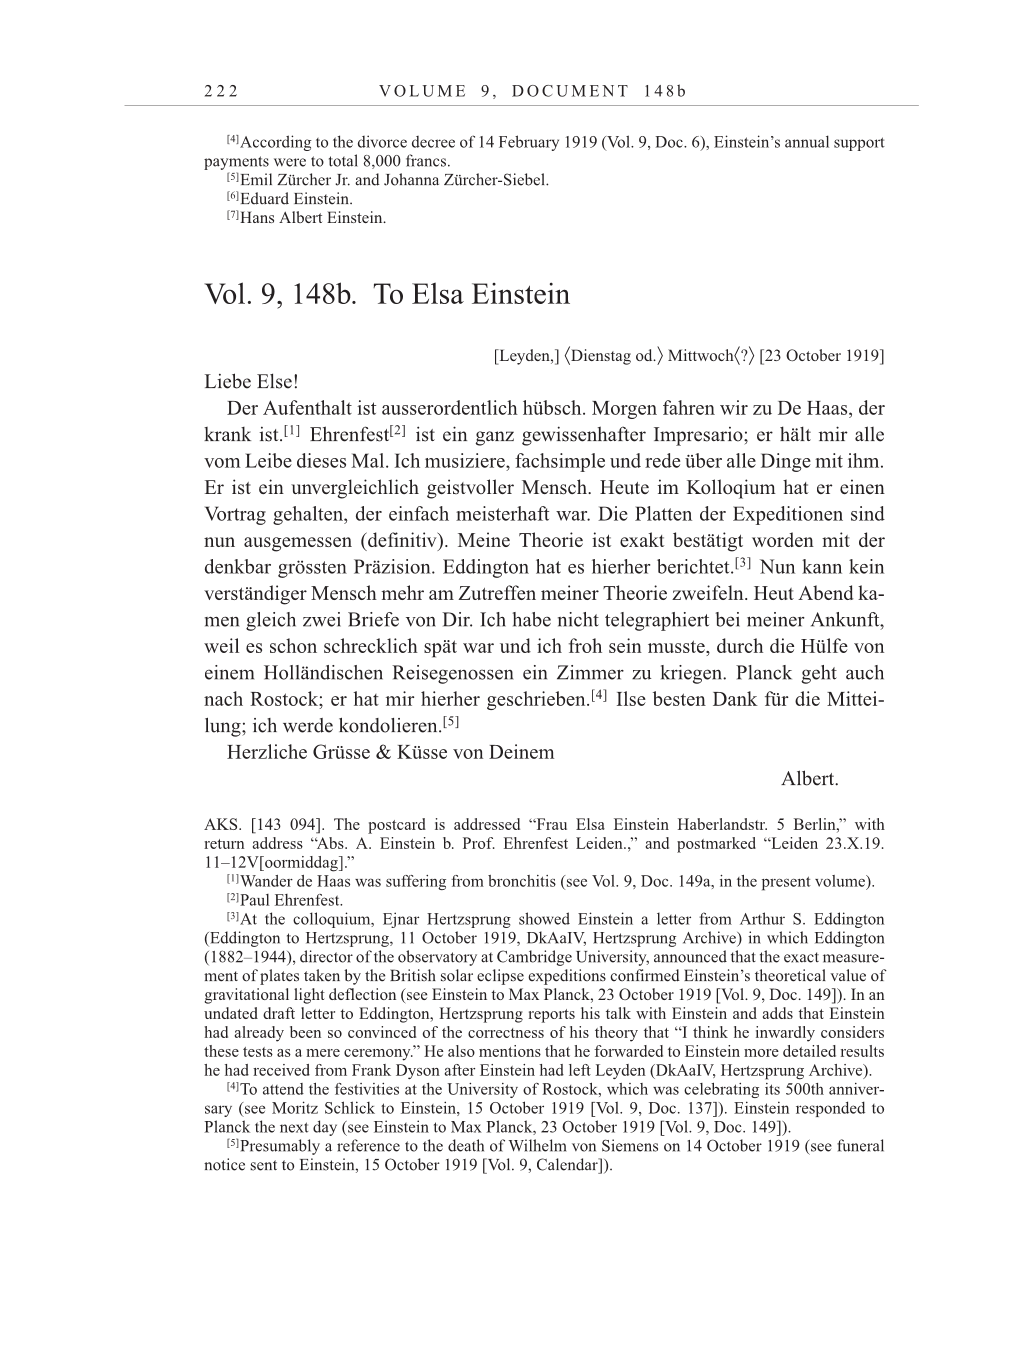 Volume 10: The Berlin Years: Correspondence May-December 1920 / Supplementary Correspondence 1909-1920 page 222